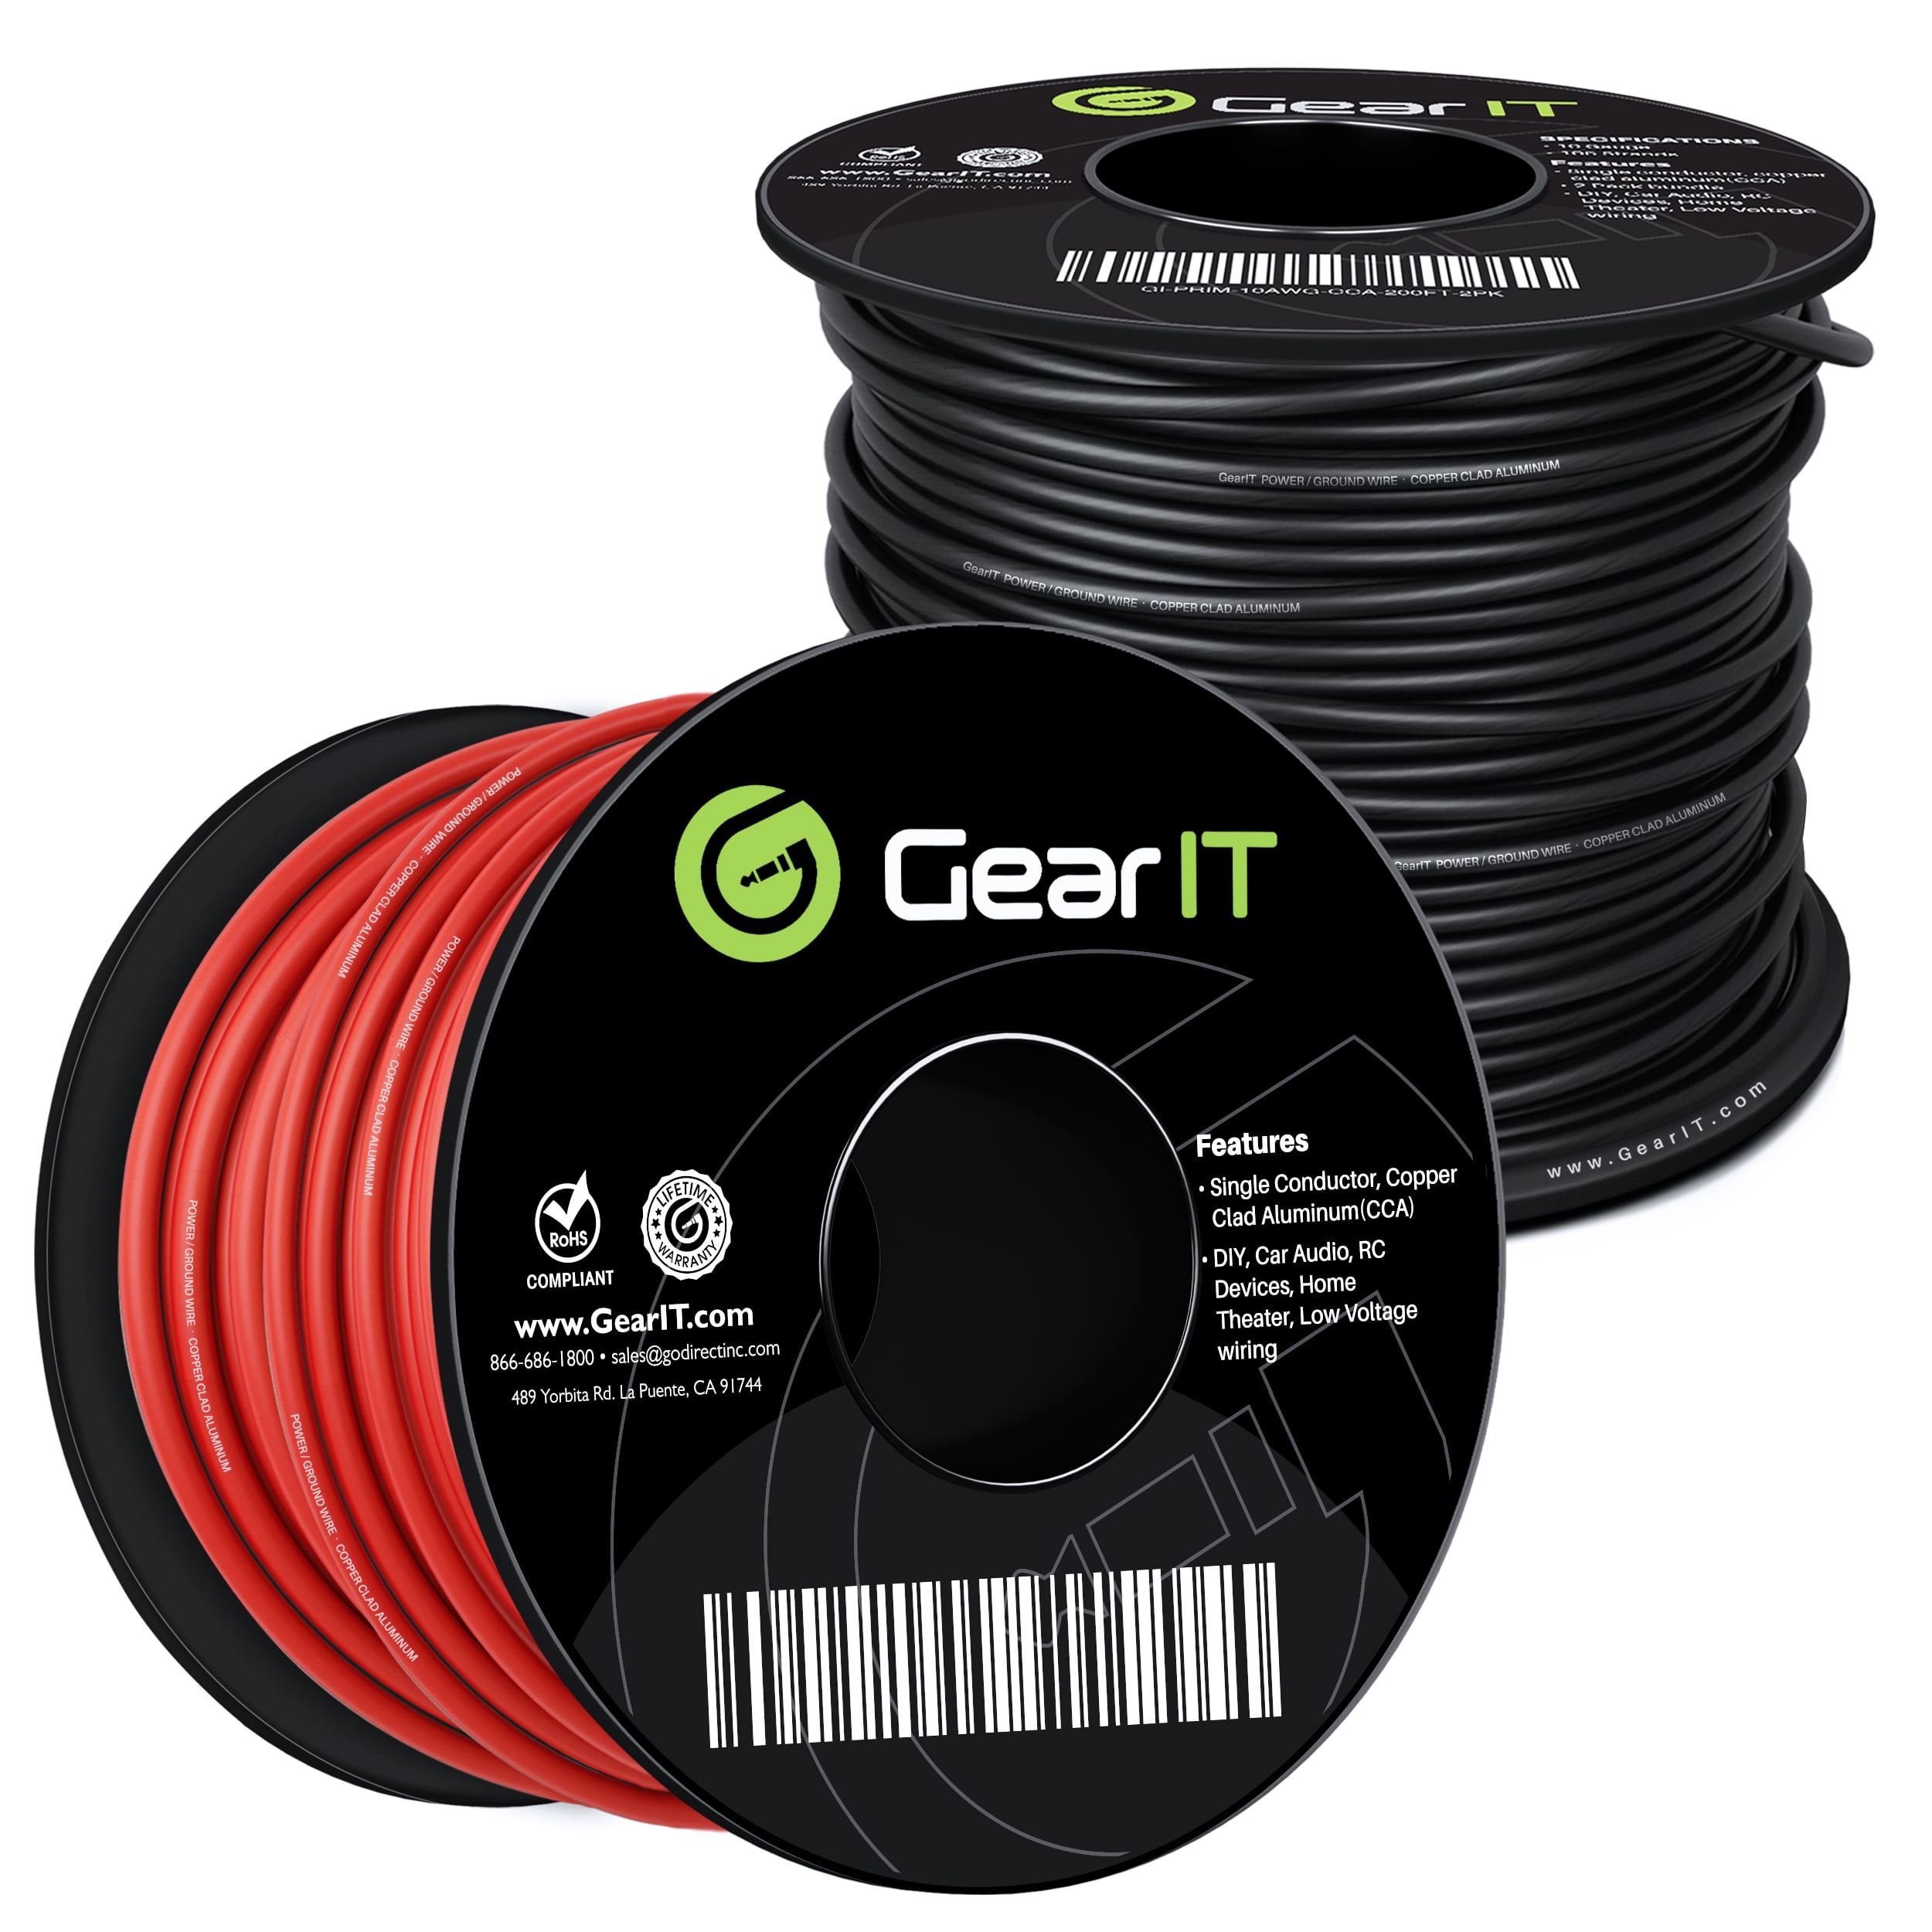 GearIT 8 Gauge Wire (10ft - Red Translucent) Copper Clad Aluminum CCA -  Primary Automotive Wire Power/Ground, Battery Cable, Car Audio Speaker, RV